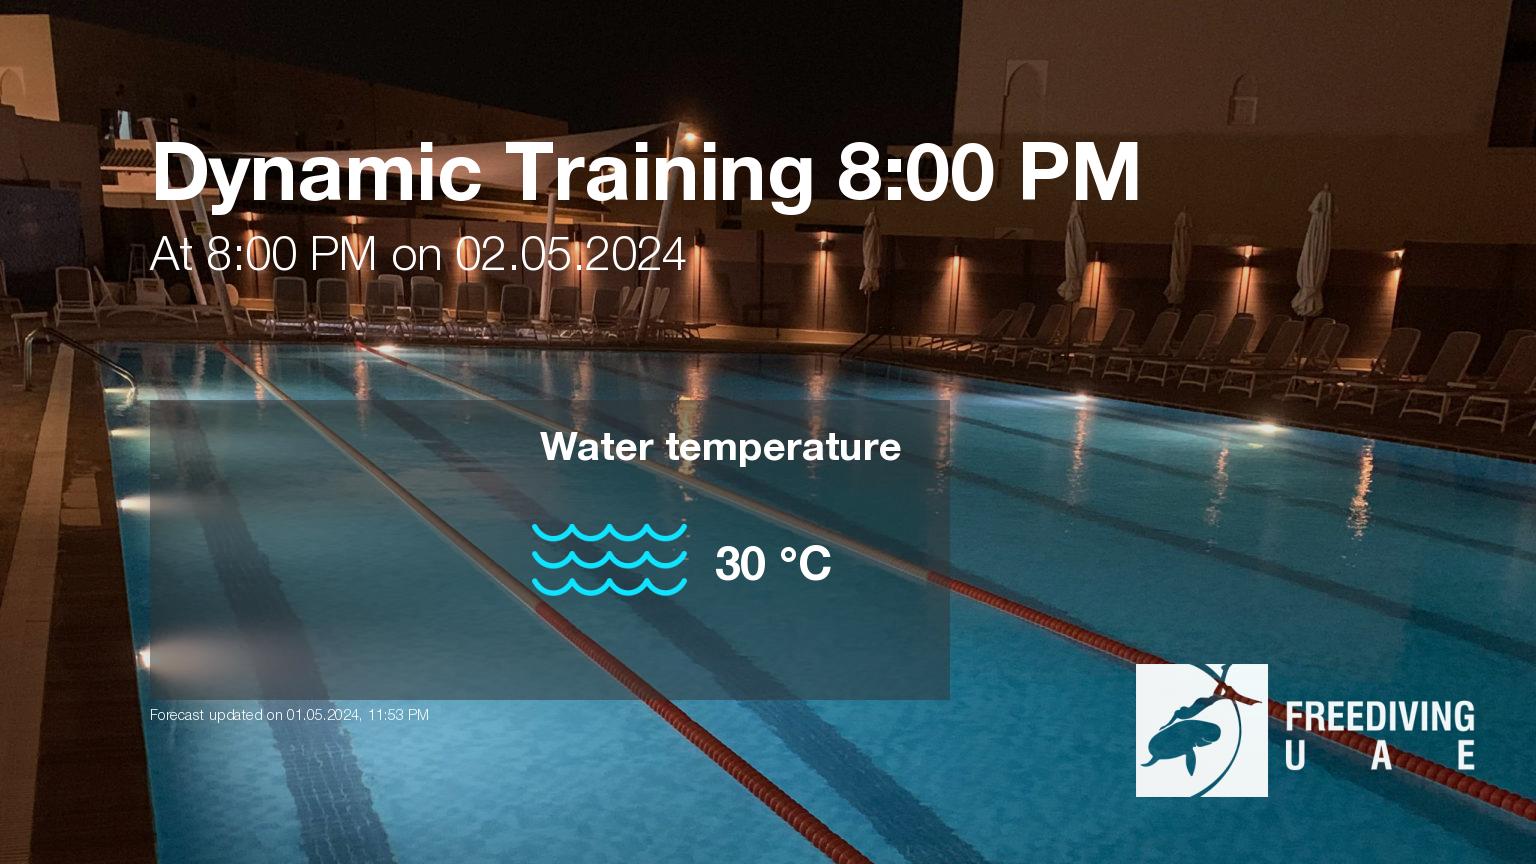 Expected weather during Dynamic Training 8:00 PM on Thu, May 2, at 8:00 PM